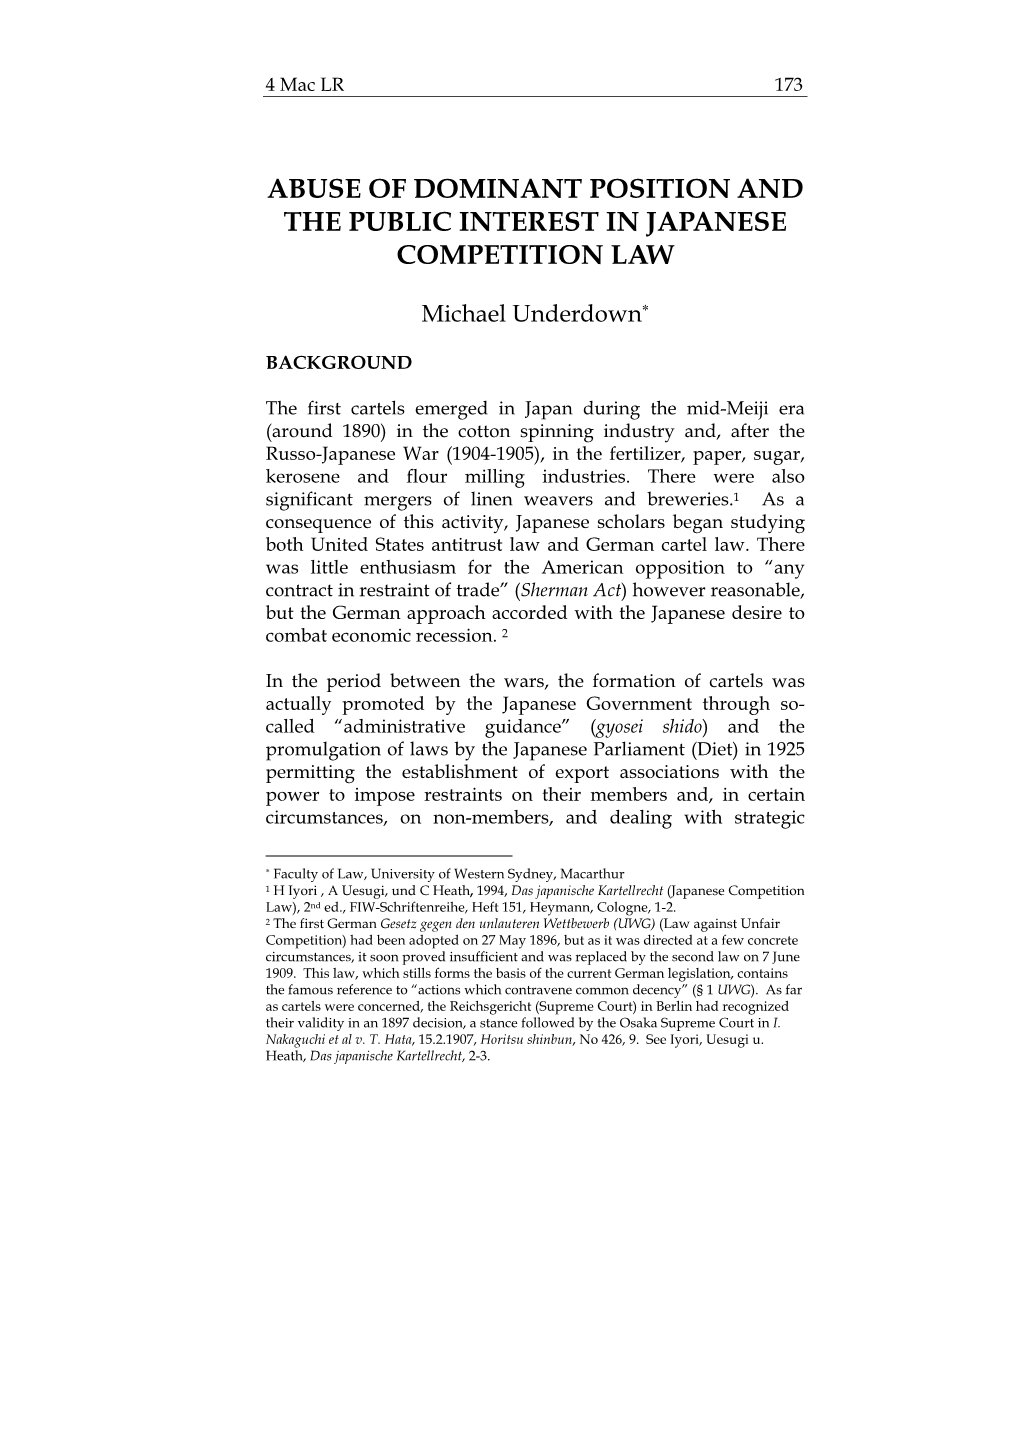 Abuse of Dominant Position and the Public Interest in Japanese Competition Law